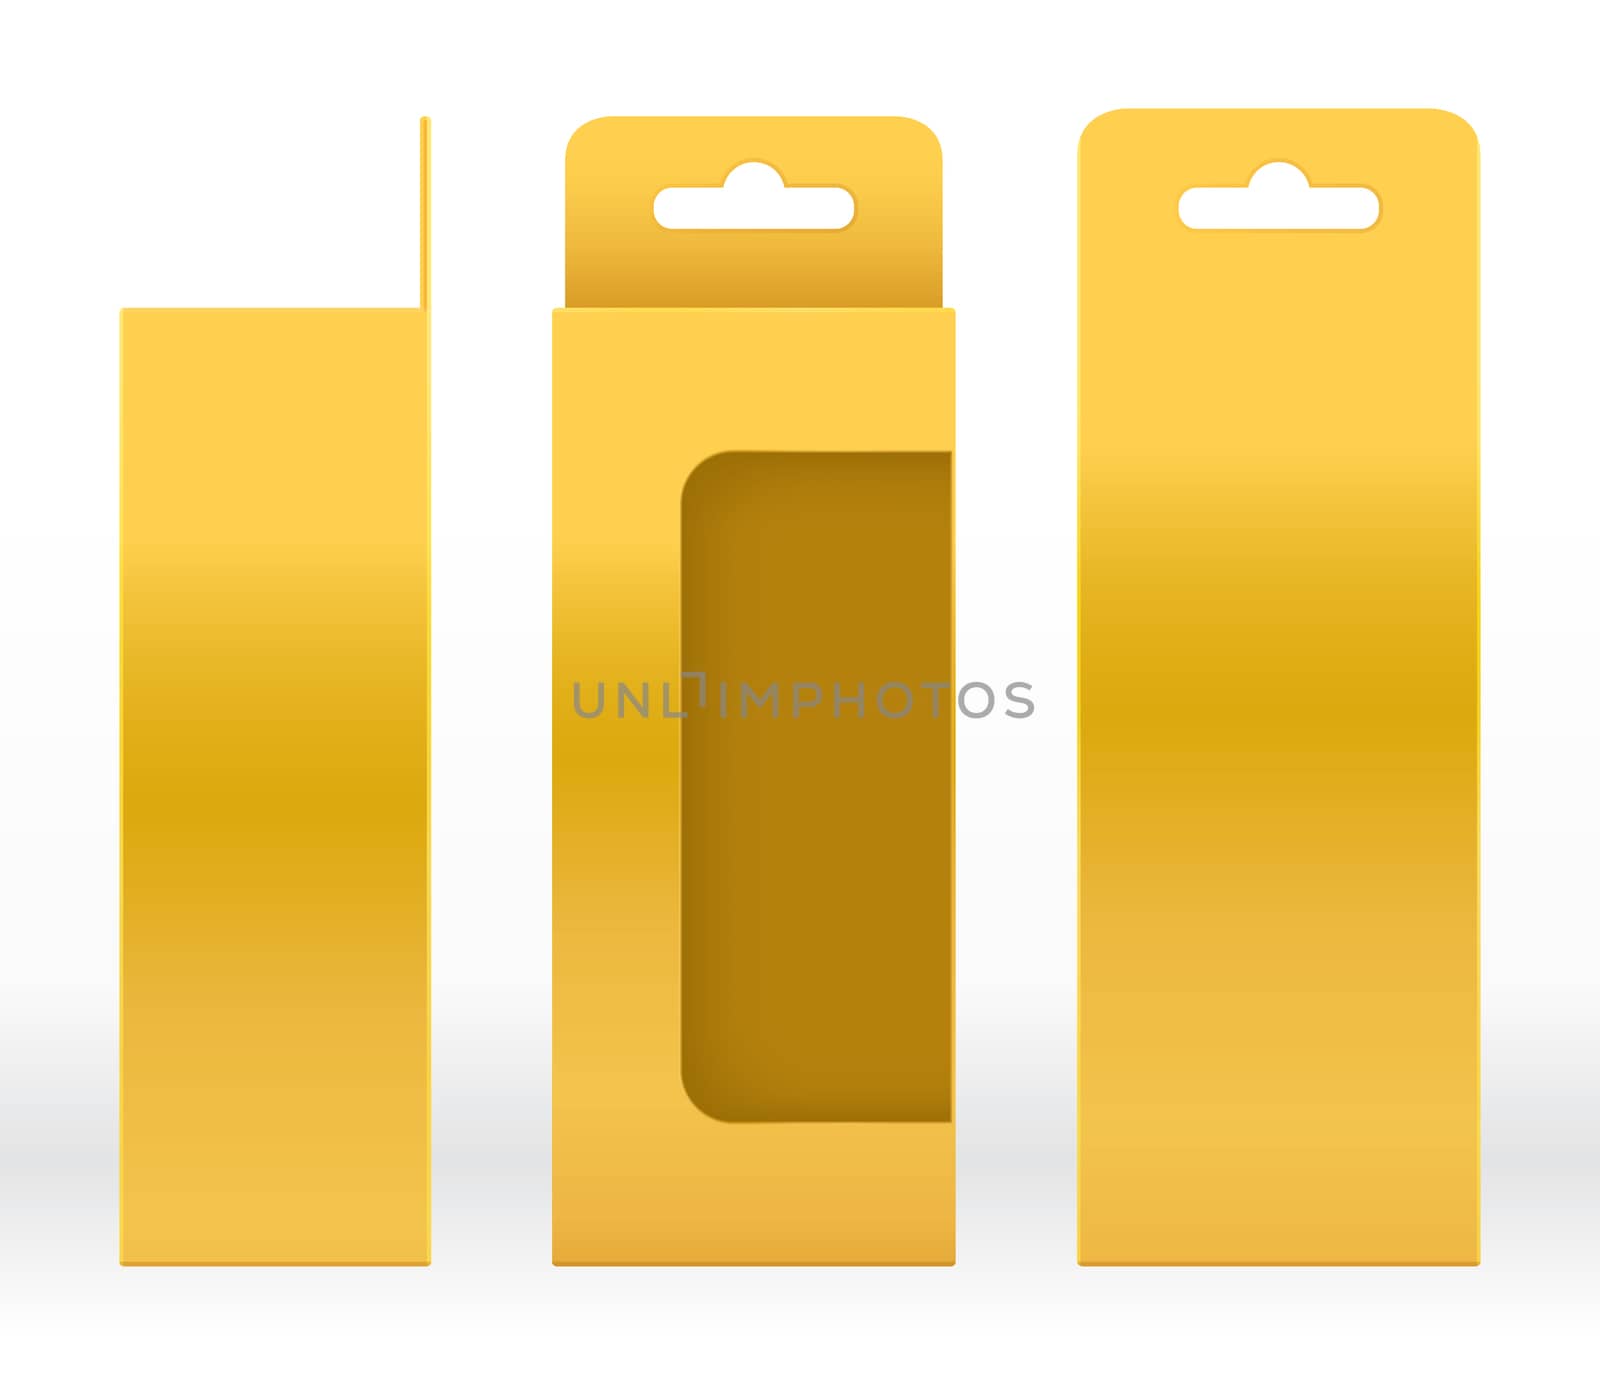 Hanging Box Gold window shape cut out Packaging Template blank. Luxury Empty Box Golden Template for design product package gift box, Gold Box packaging paper kraft cardboard package